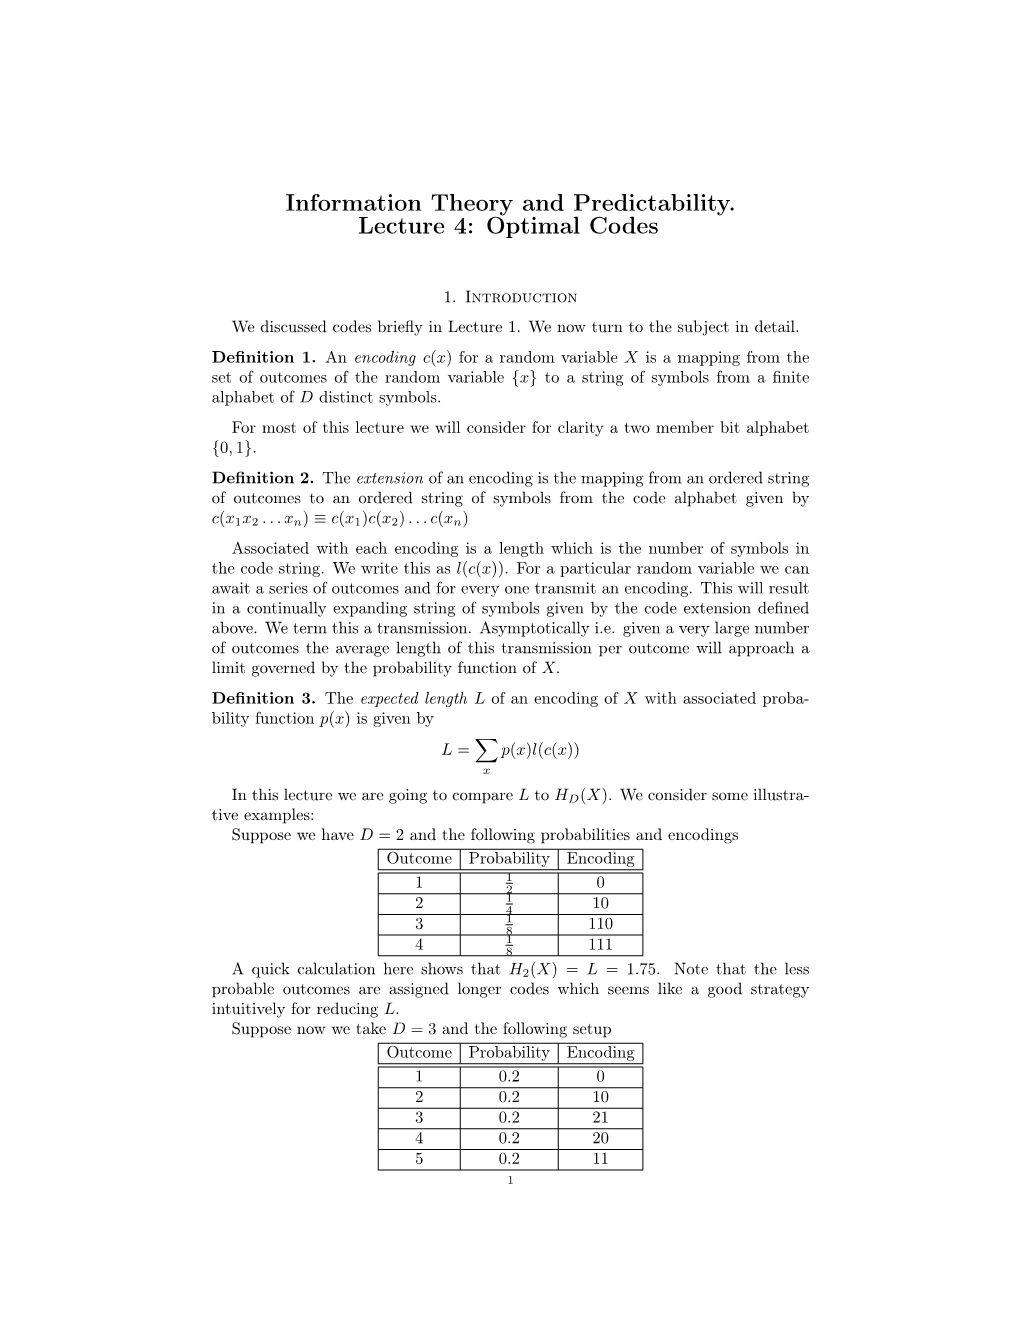 Information Theory and Predictability. Lecture 4: Optimal Codes